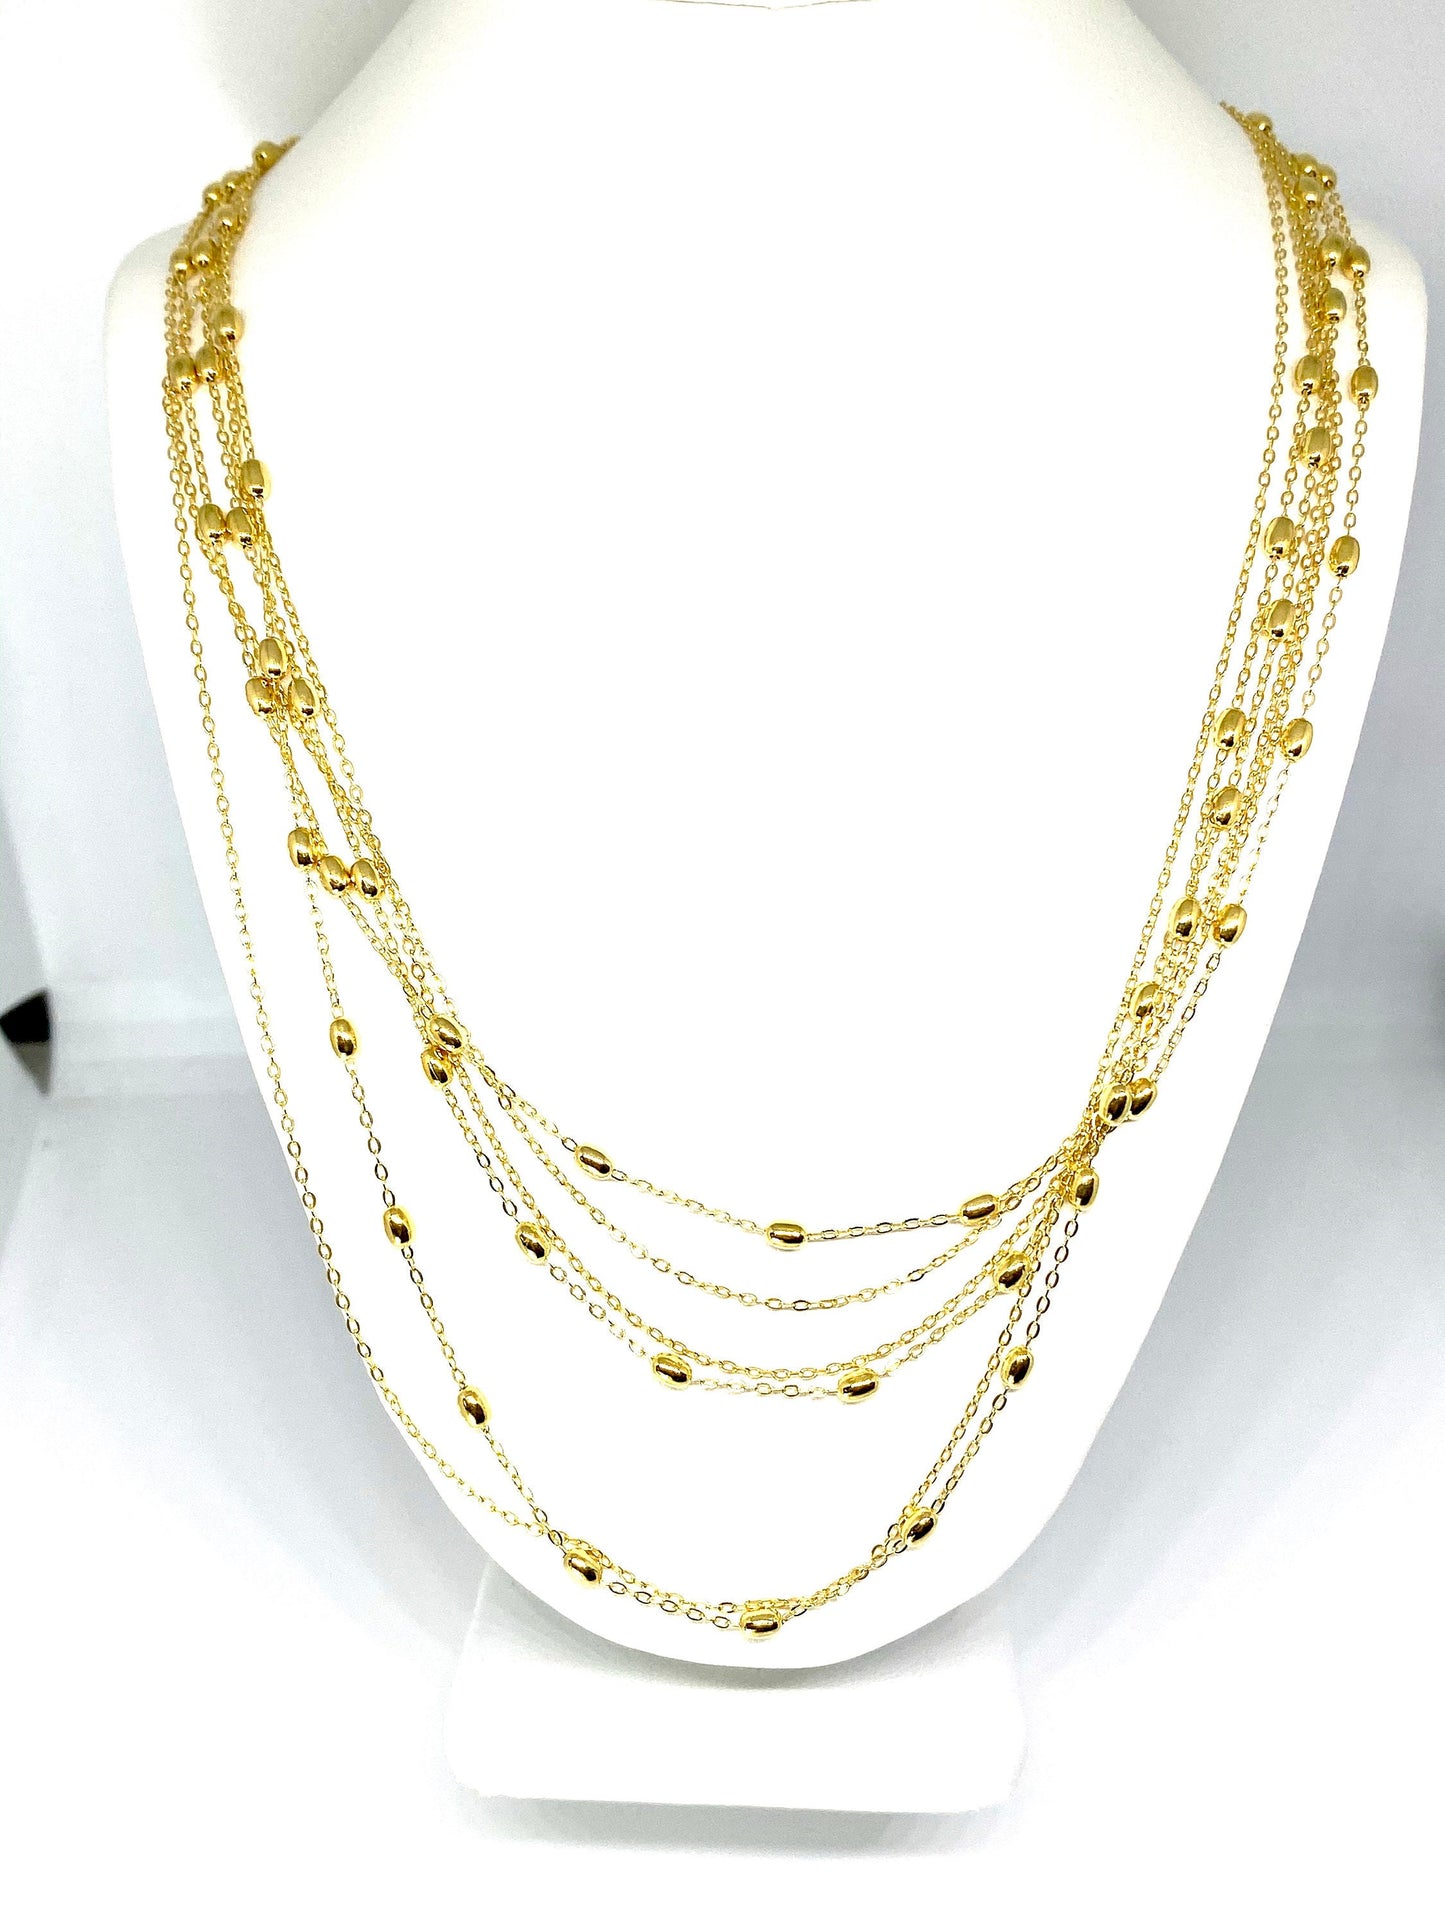 Gold over sterling silver fancy BEADED NECKLACE